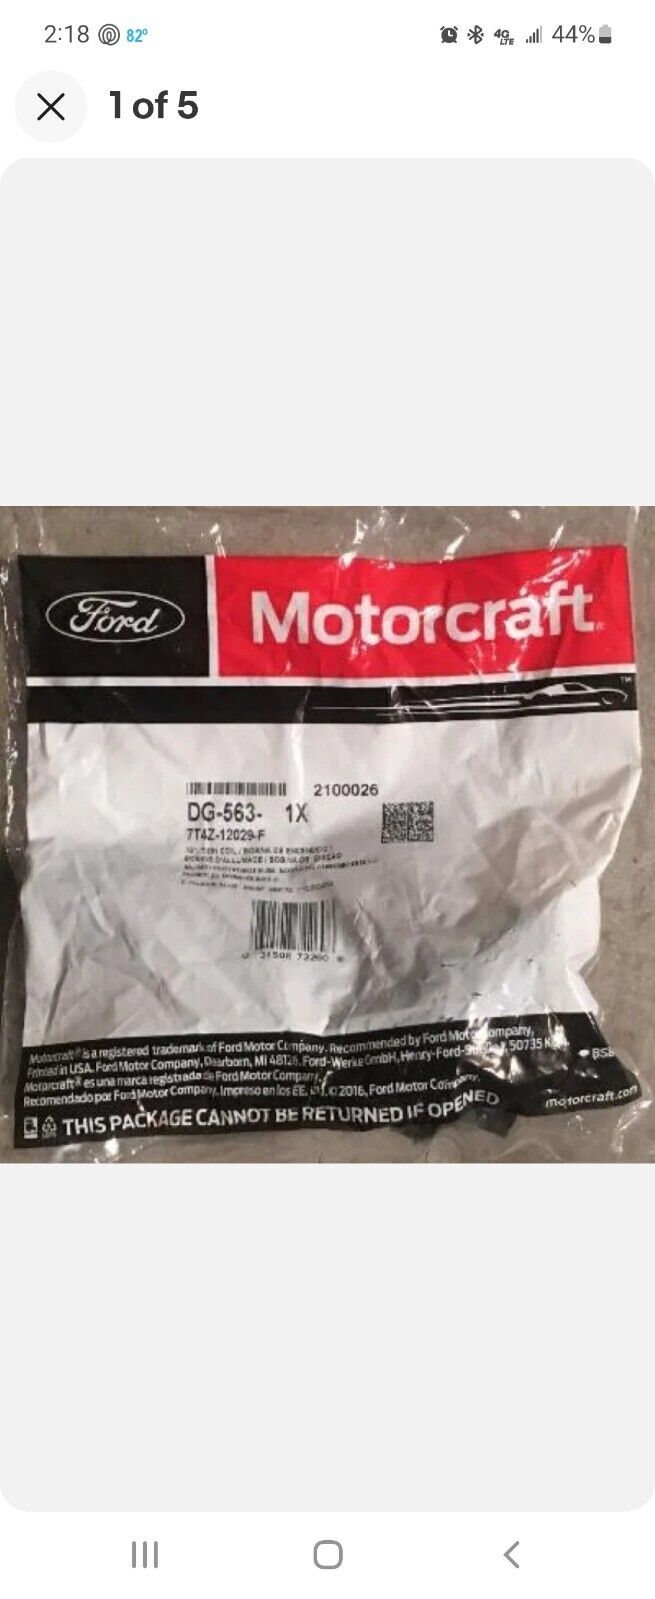 SIX DG563 MOTORCRAFT IGNITION COILS BRAND NEW IN SEALED PACKAGING 